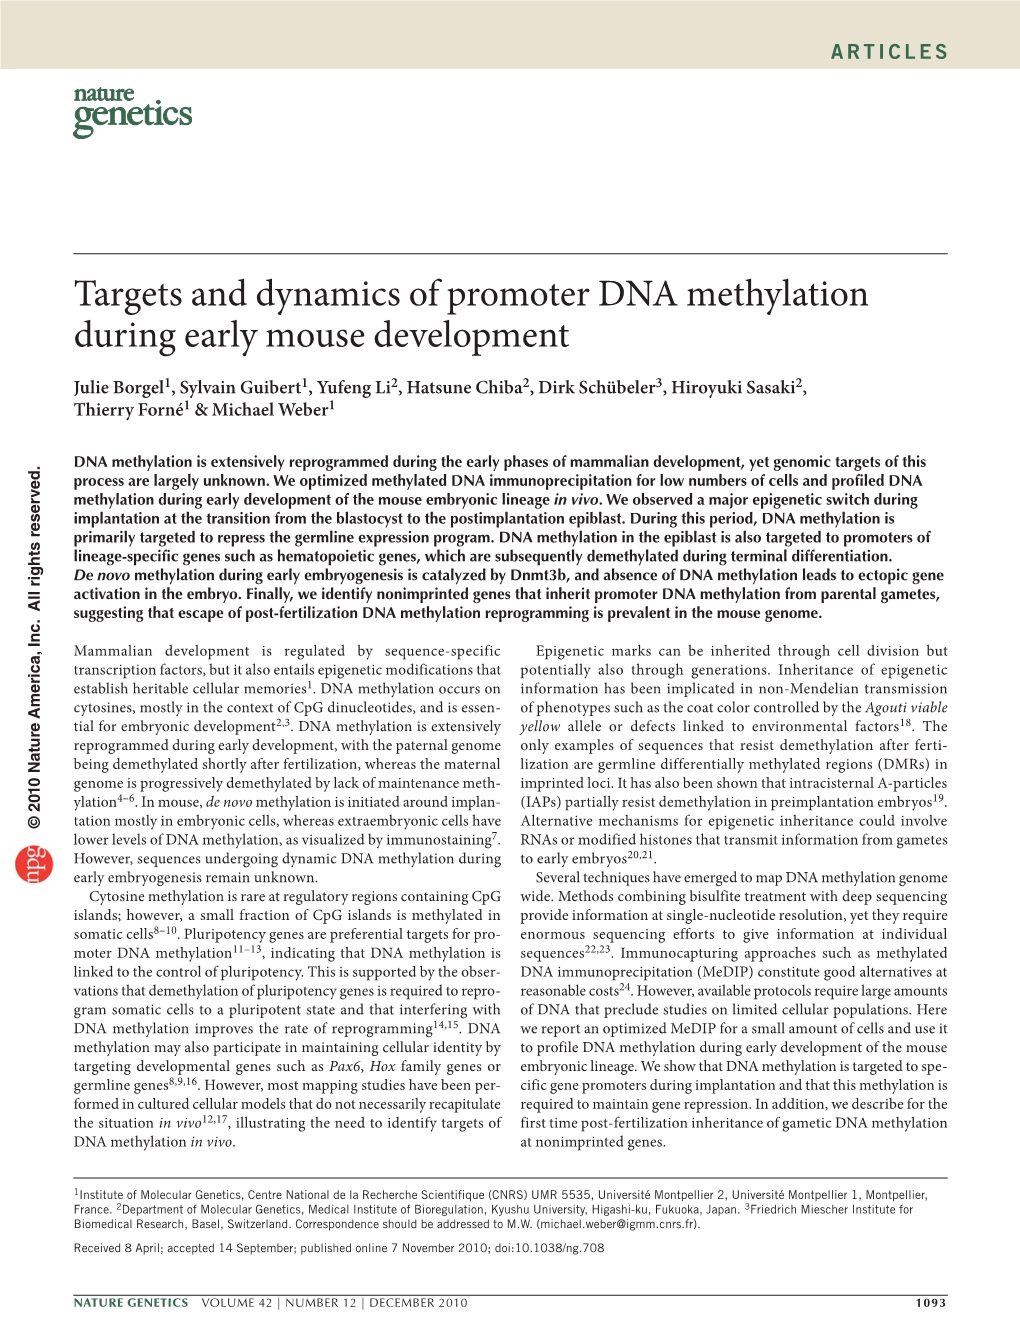 Targets and Dynamics of Promoter DNA Methylation During Early